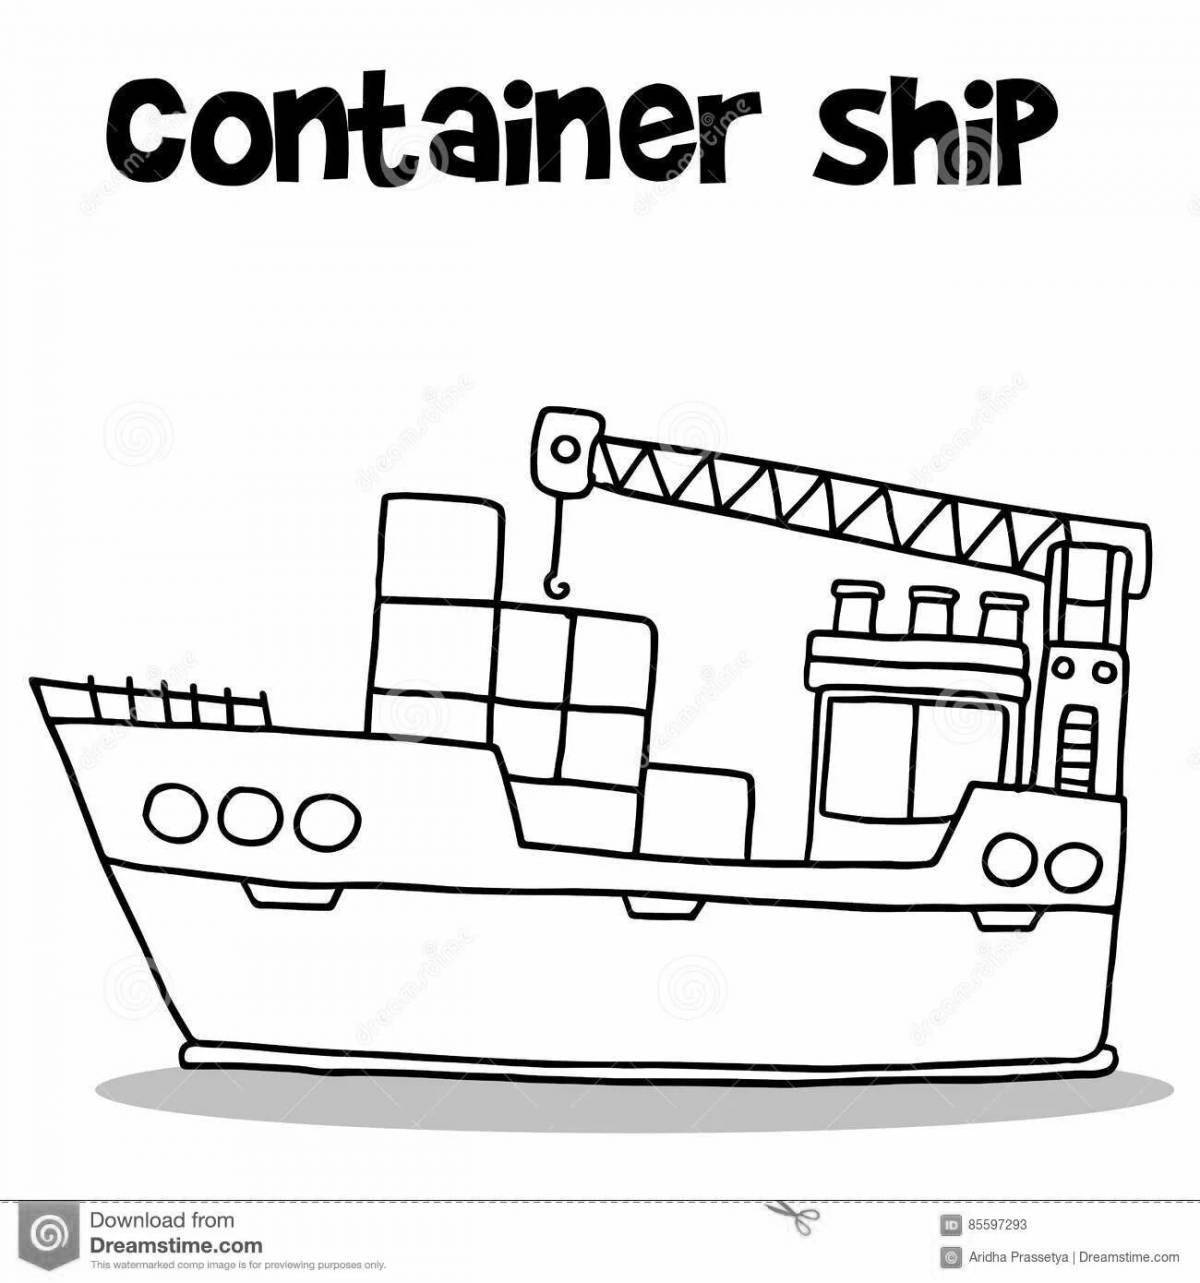 Impressive container ship coloring page